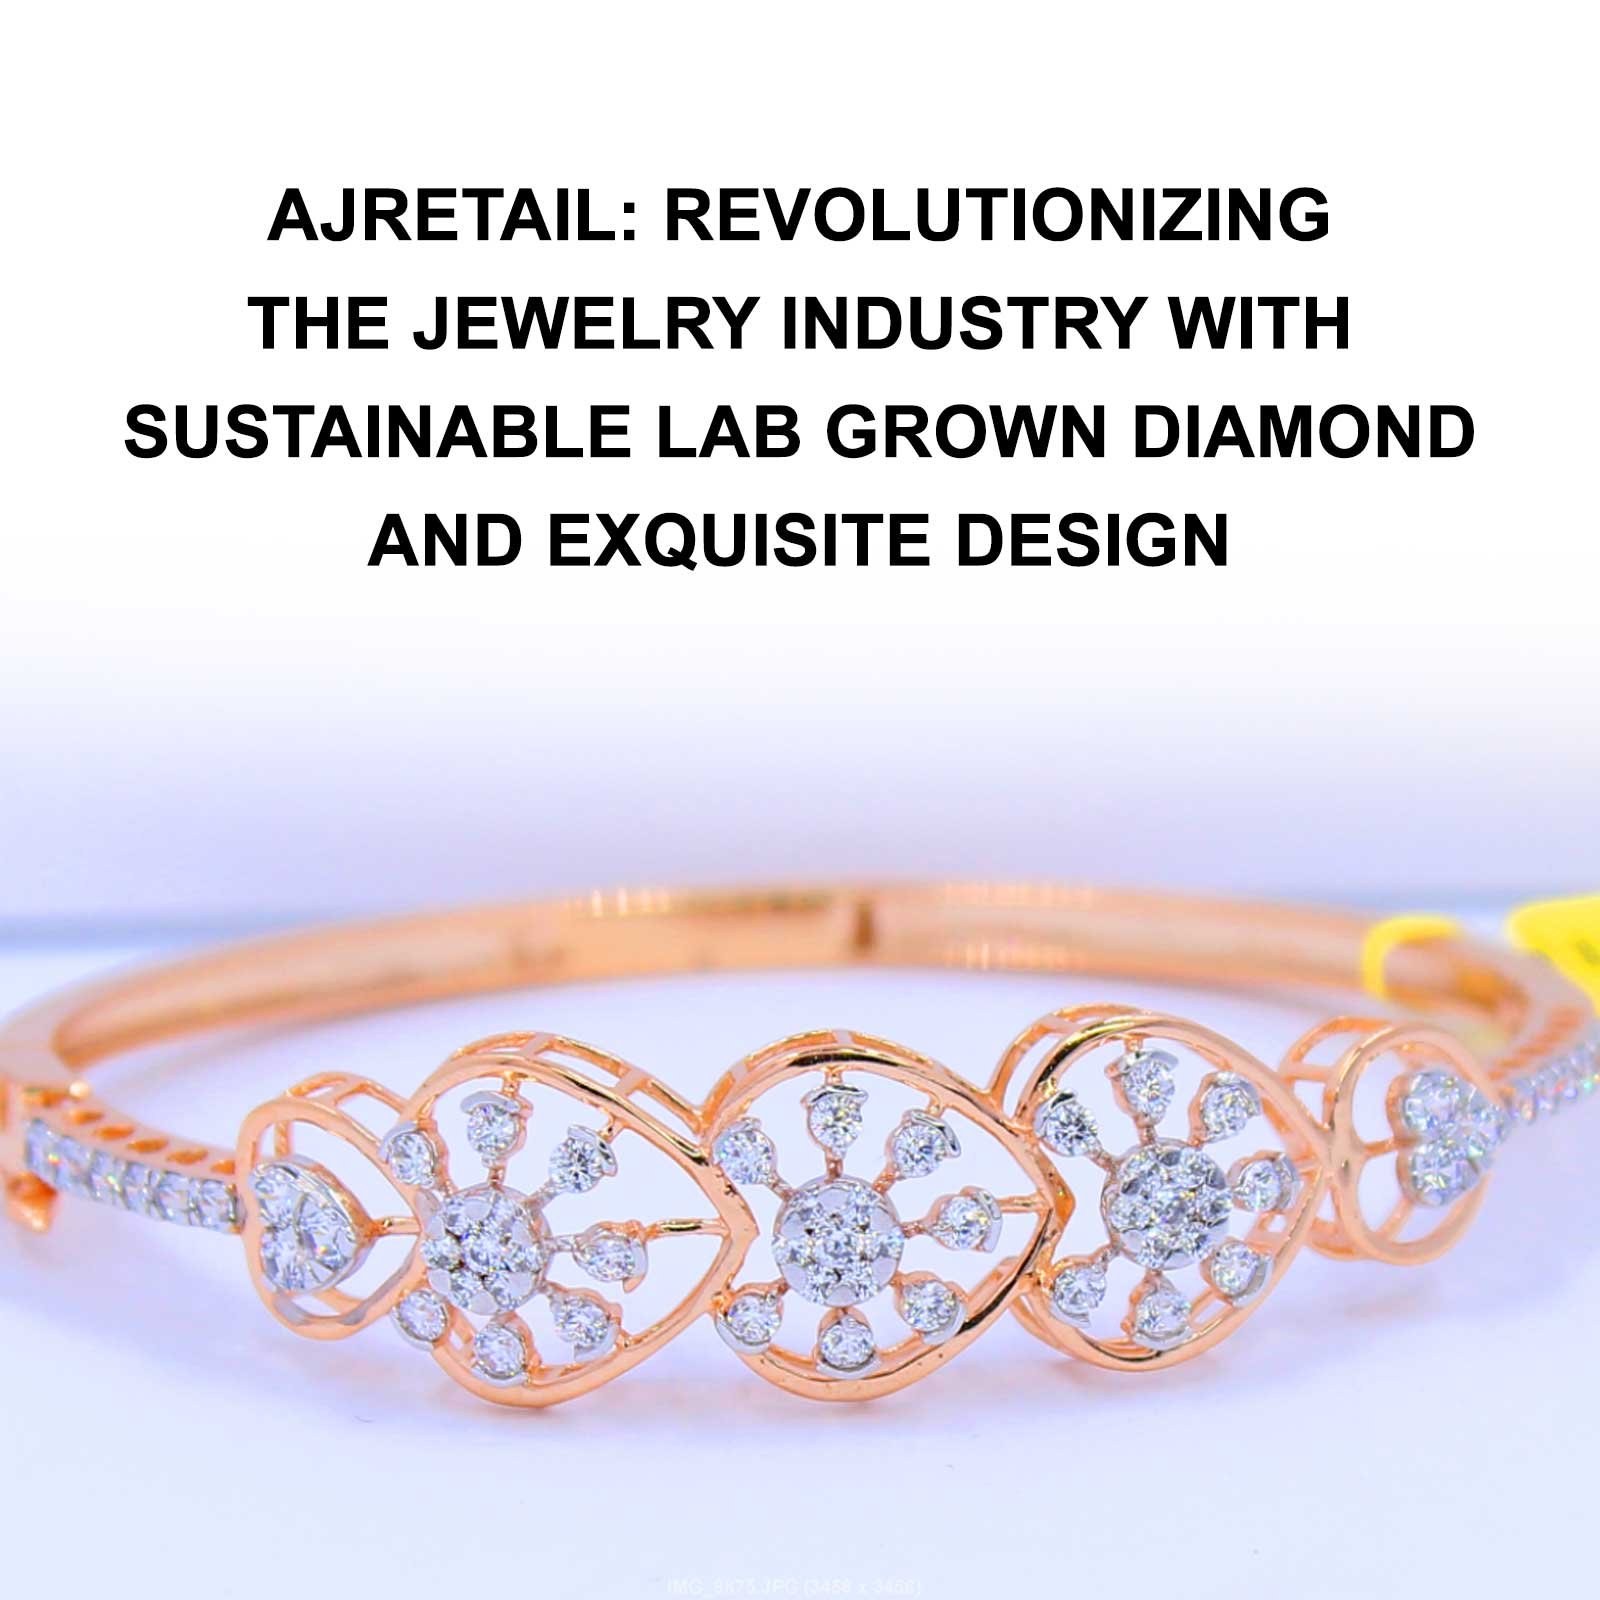 AJ Retail: Revolutionizing the Jewelry Industry with Sustainable Lab-Grown Diamonds and Exquisite Designs